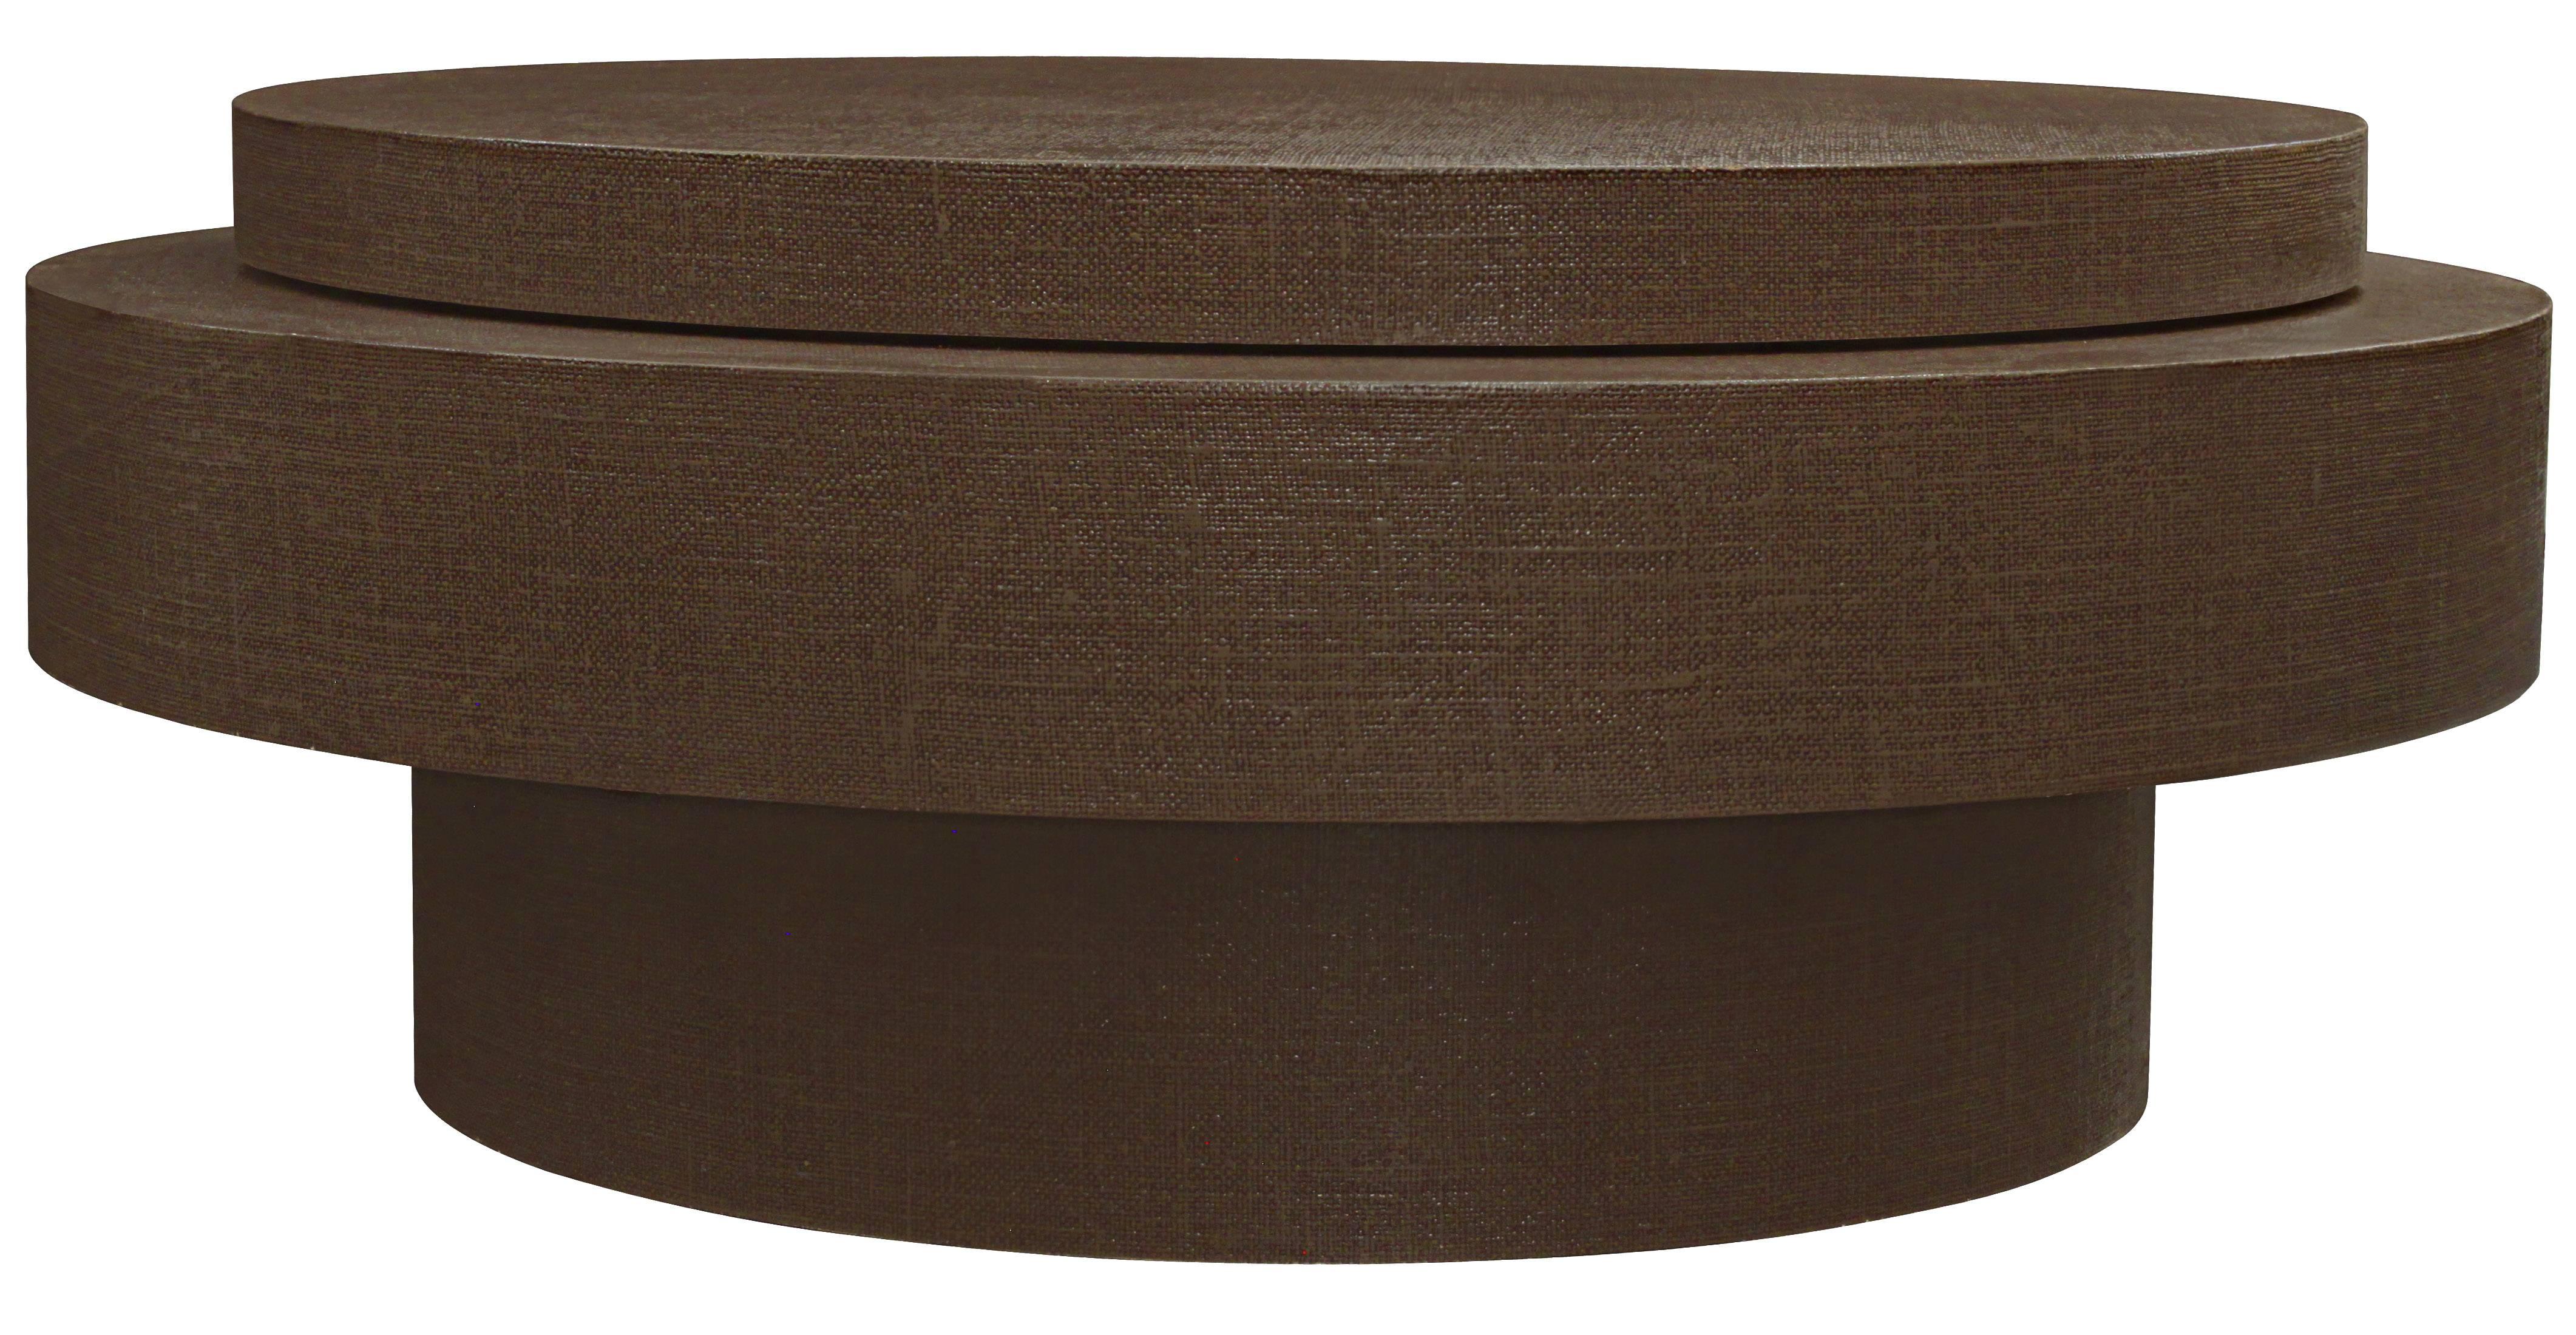 Mid-Century Modern Chic Coffee Table in Lacquered Linen with Rotating Top